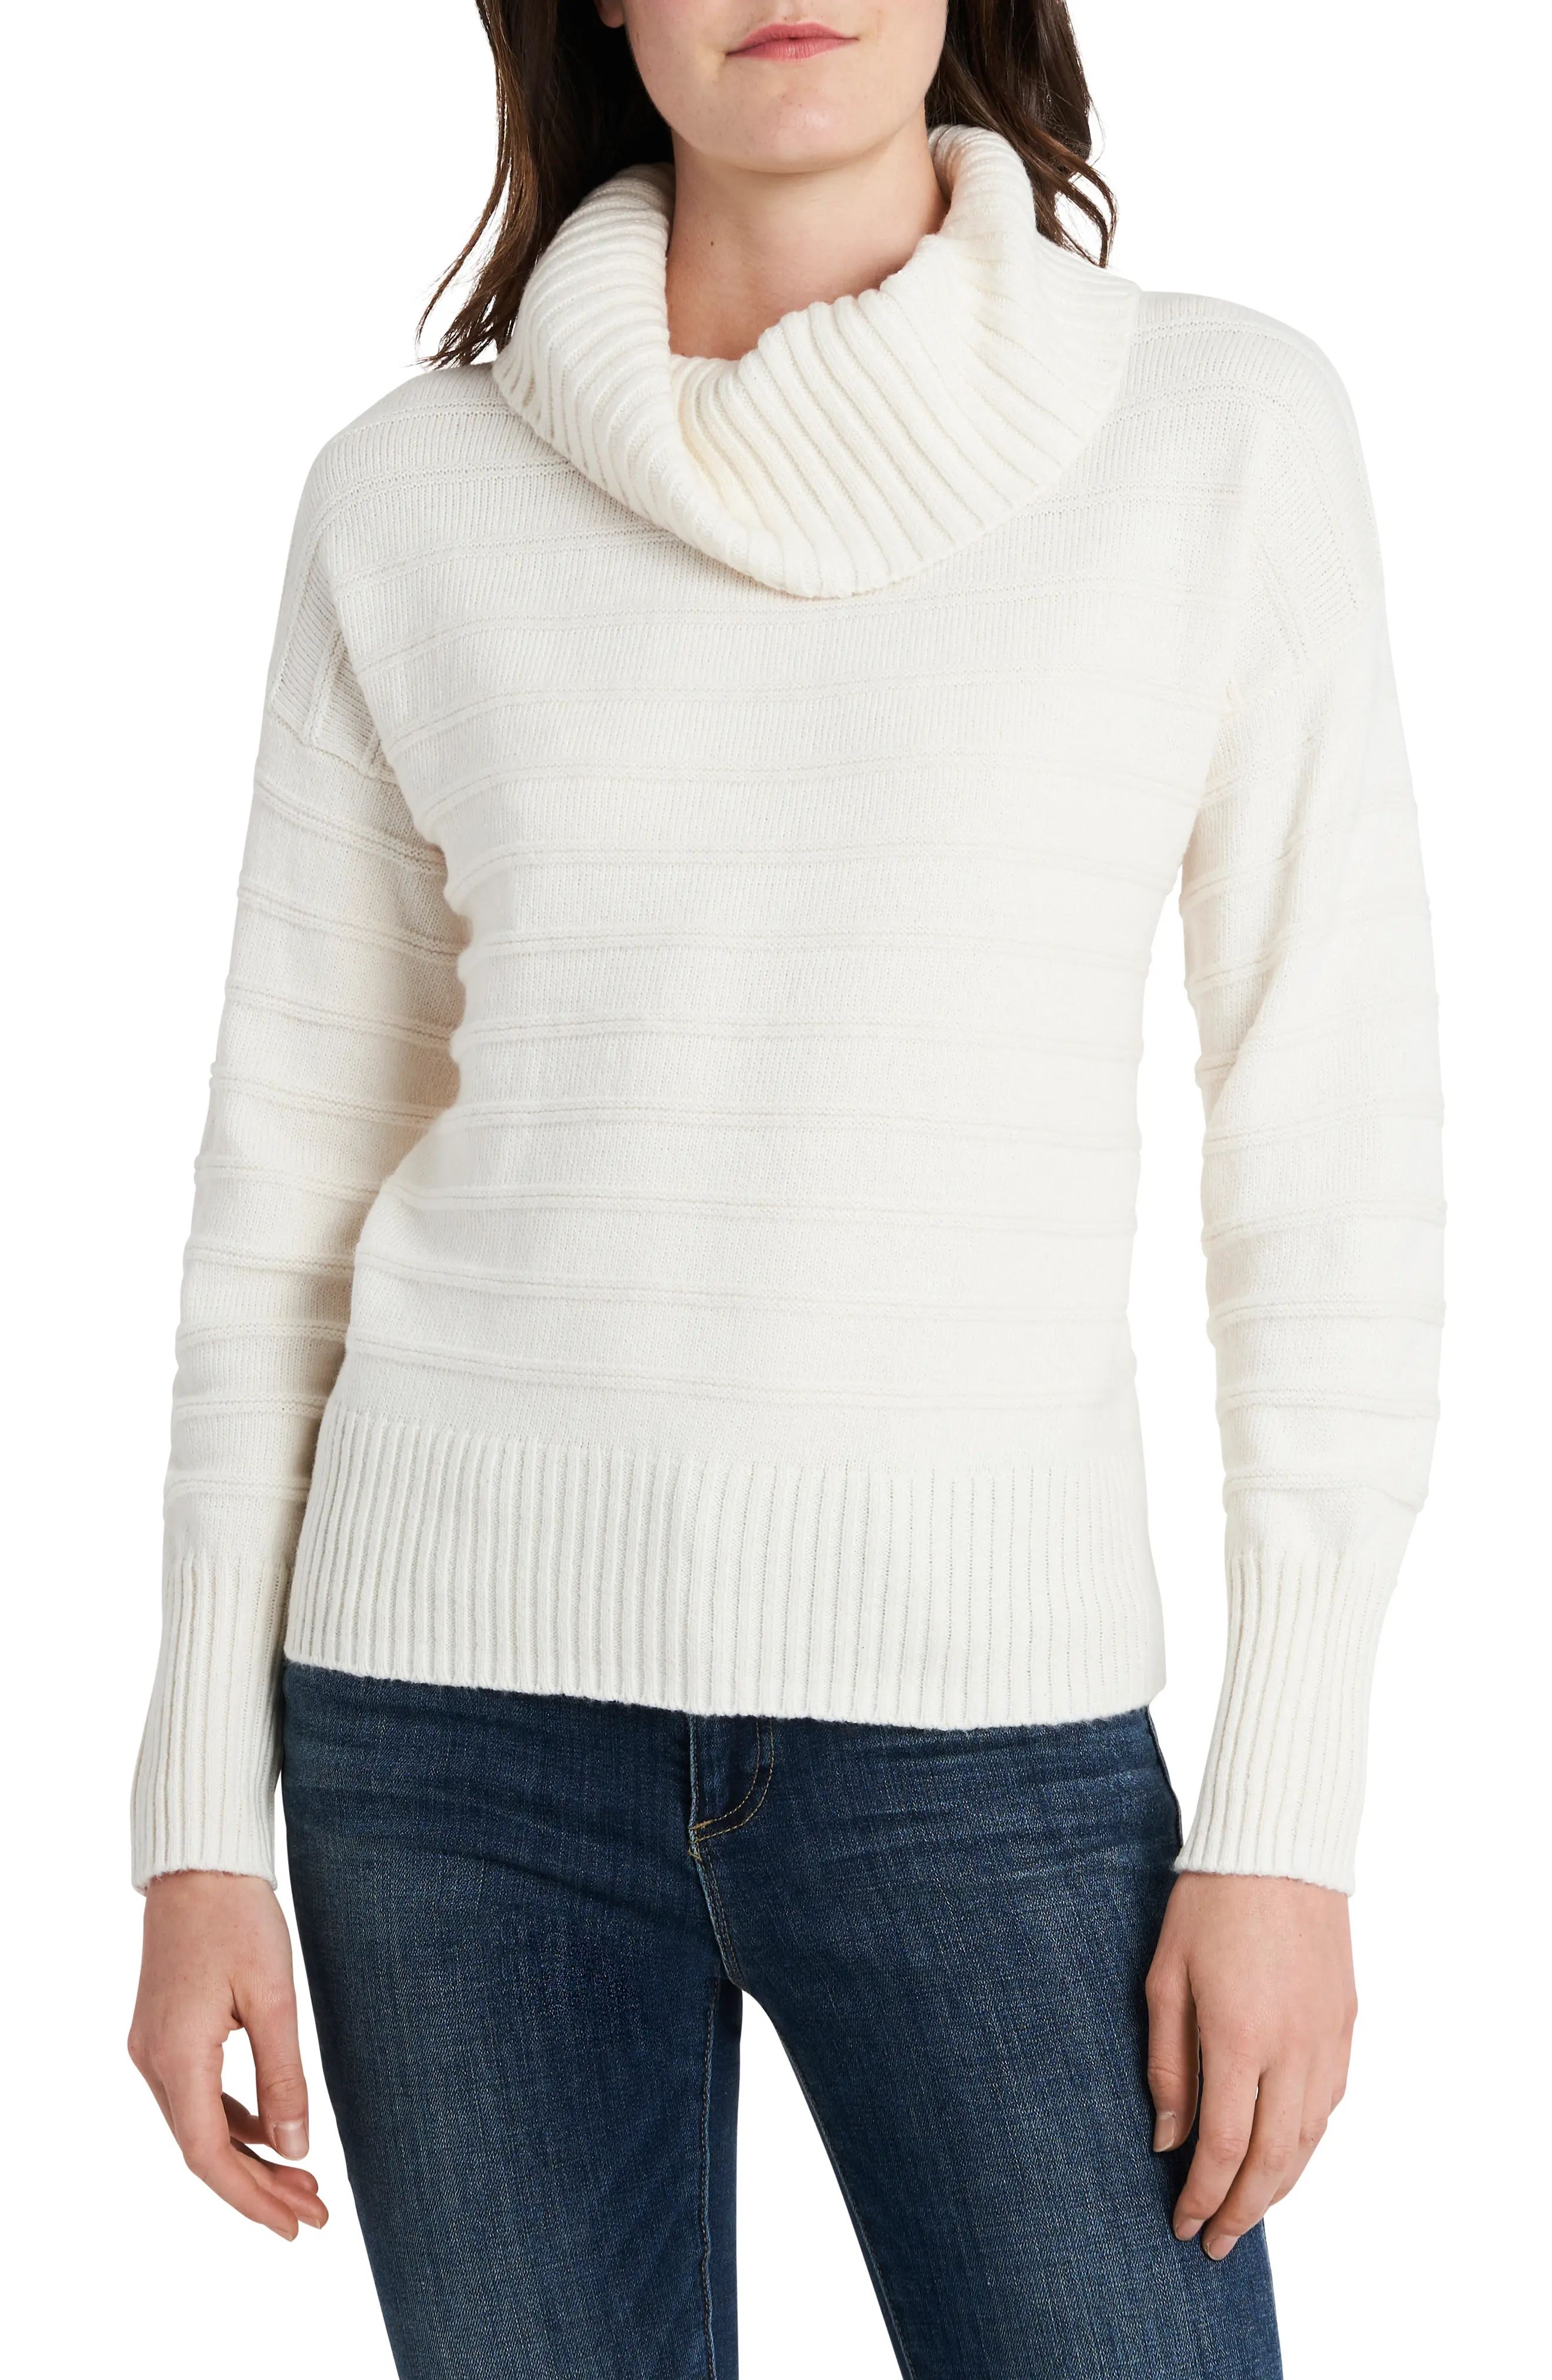 Vince Camuto Texture Stripe Cotton Blend Cowl Neck Sweater, Size X-Small in Antiq White at Nordstrom | Nordstrom